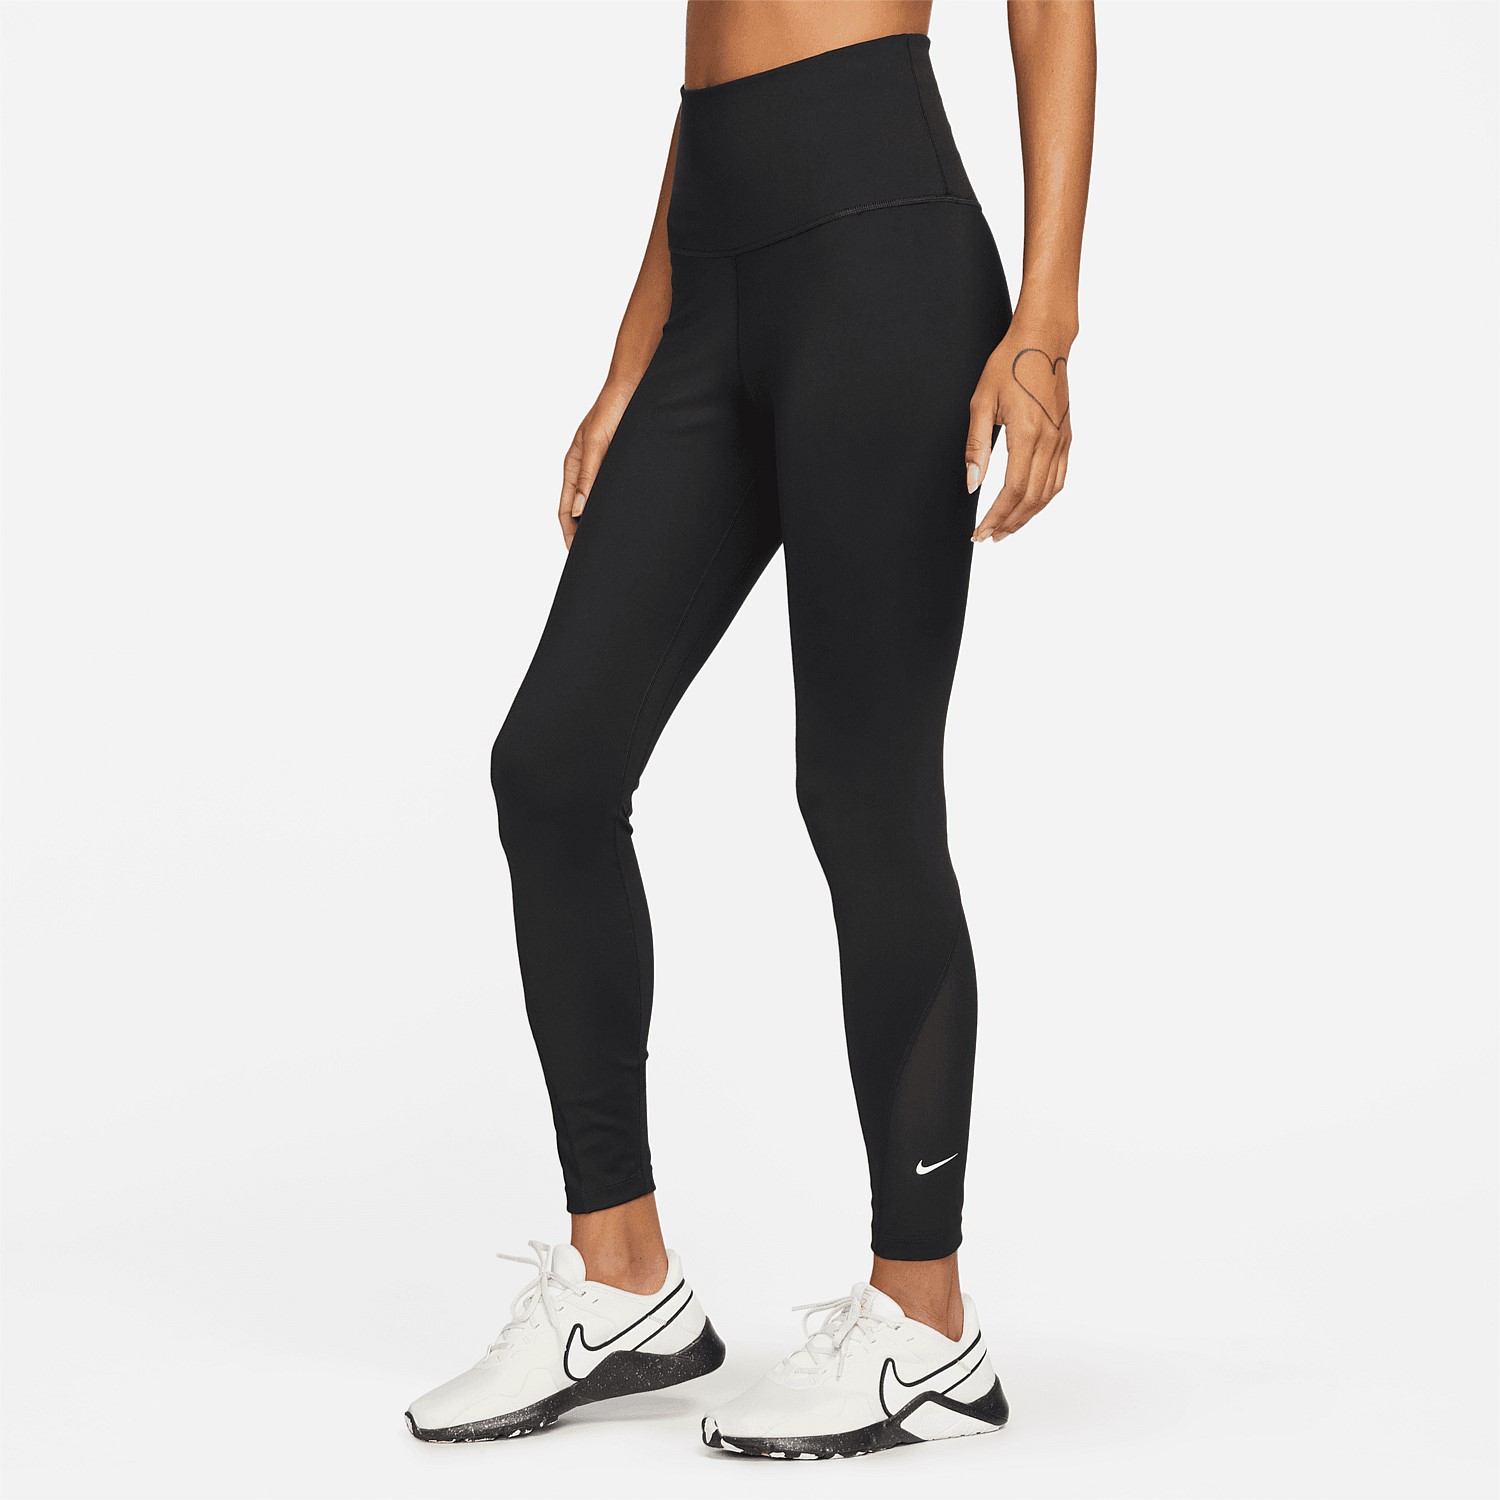 Nike One Dri-FIT High-Waisted 7/8 Tights, Tights